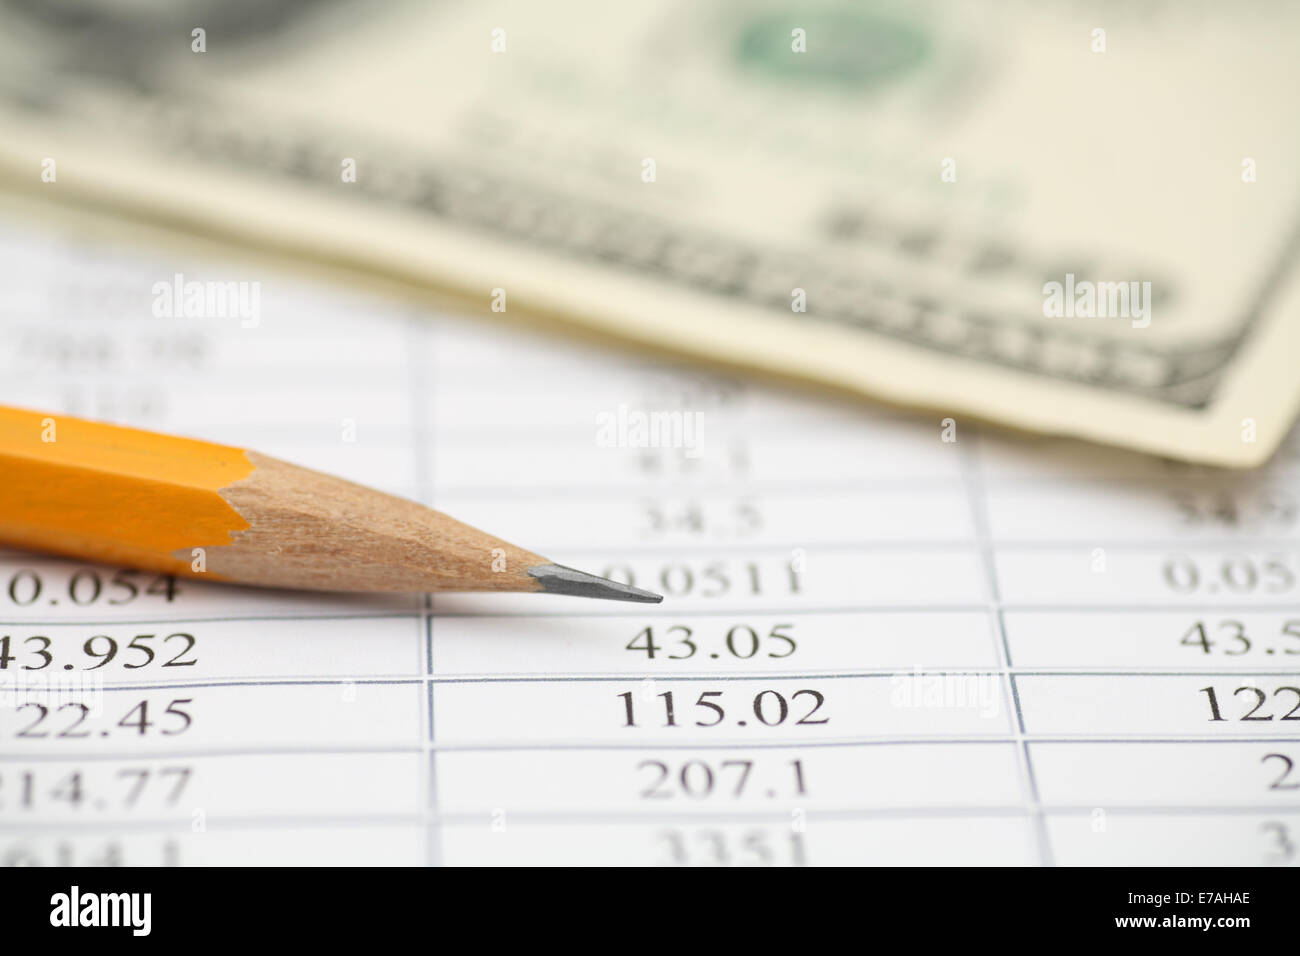 Financial statements, pencil and one hundred dollars. Shallow depth of field. Closeup. Stock Photo